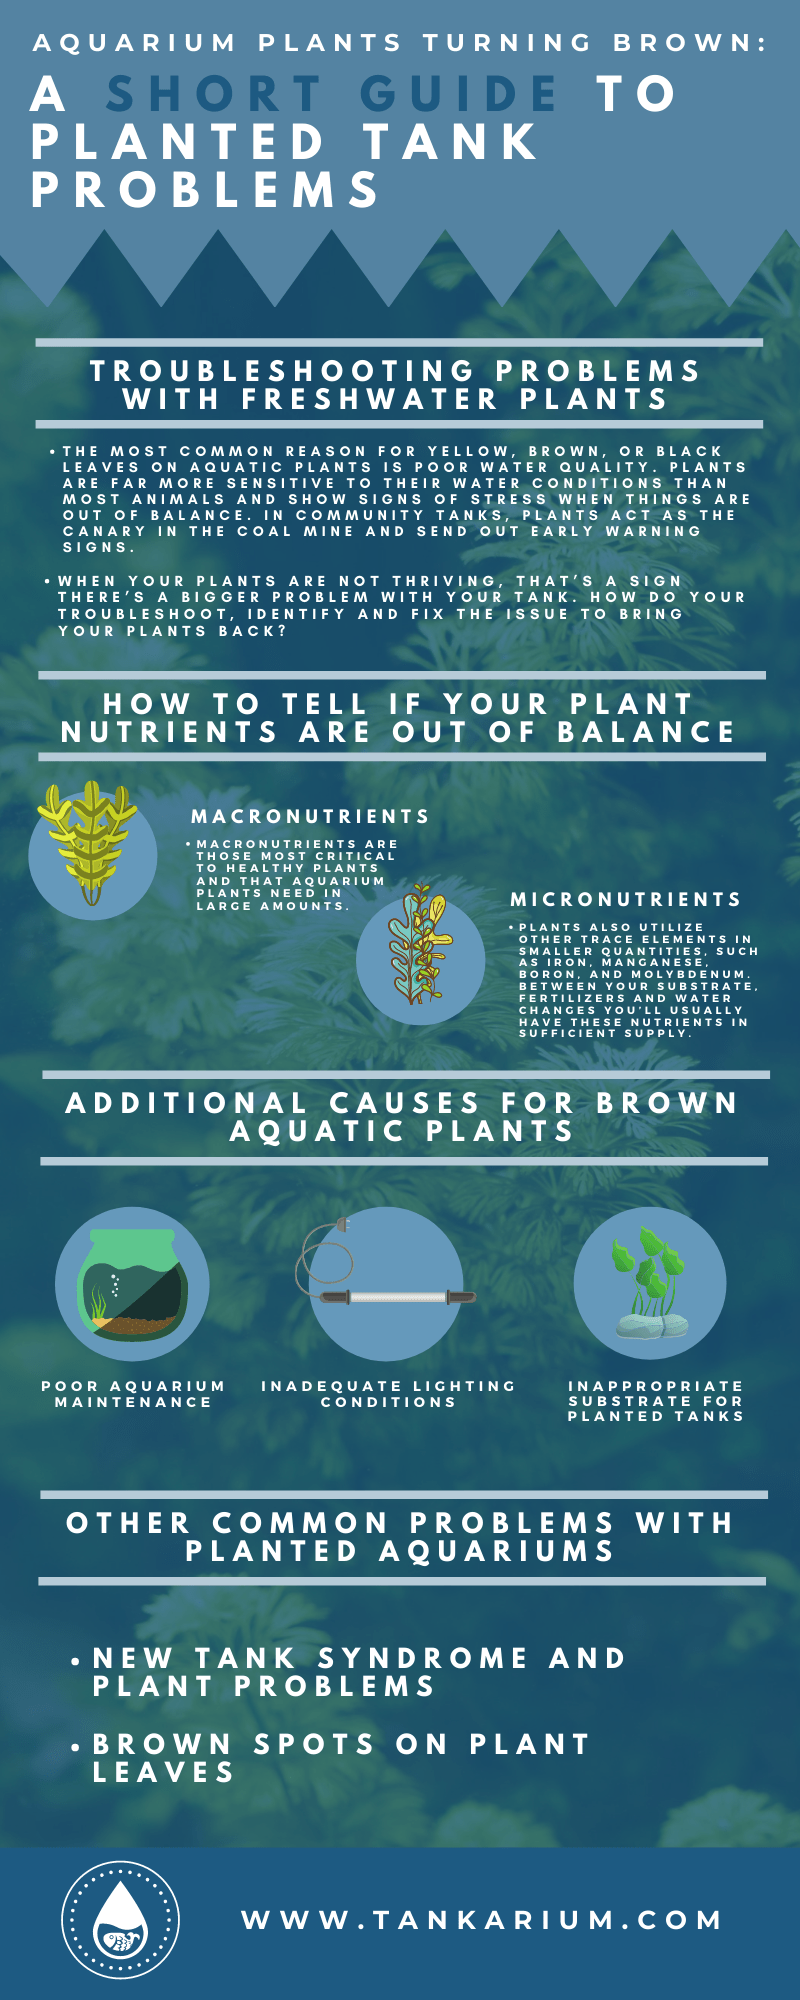 Aquarium Plants Turning Brown? A Short Guide to Planted Tank Problems - Infographic